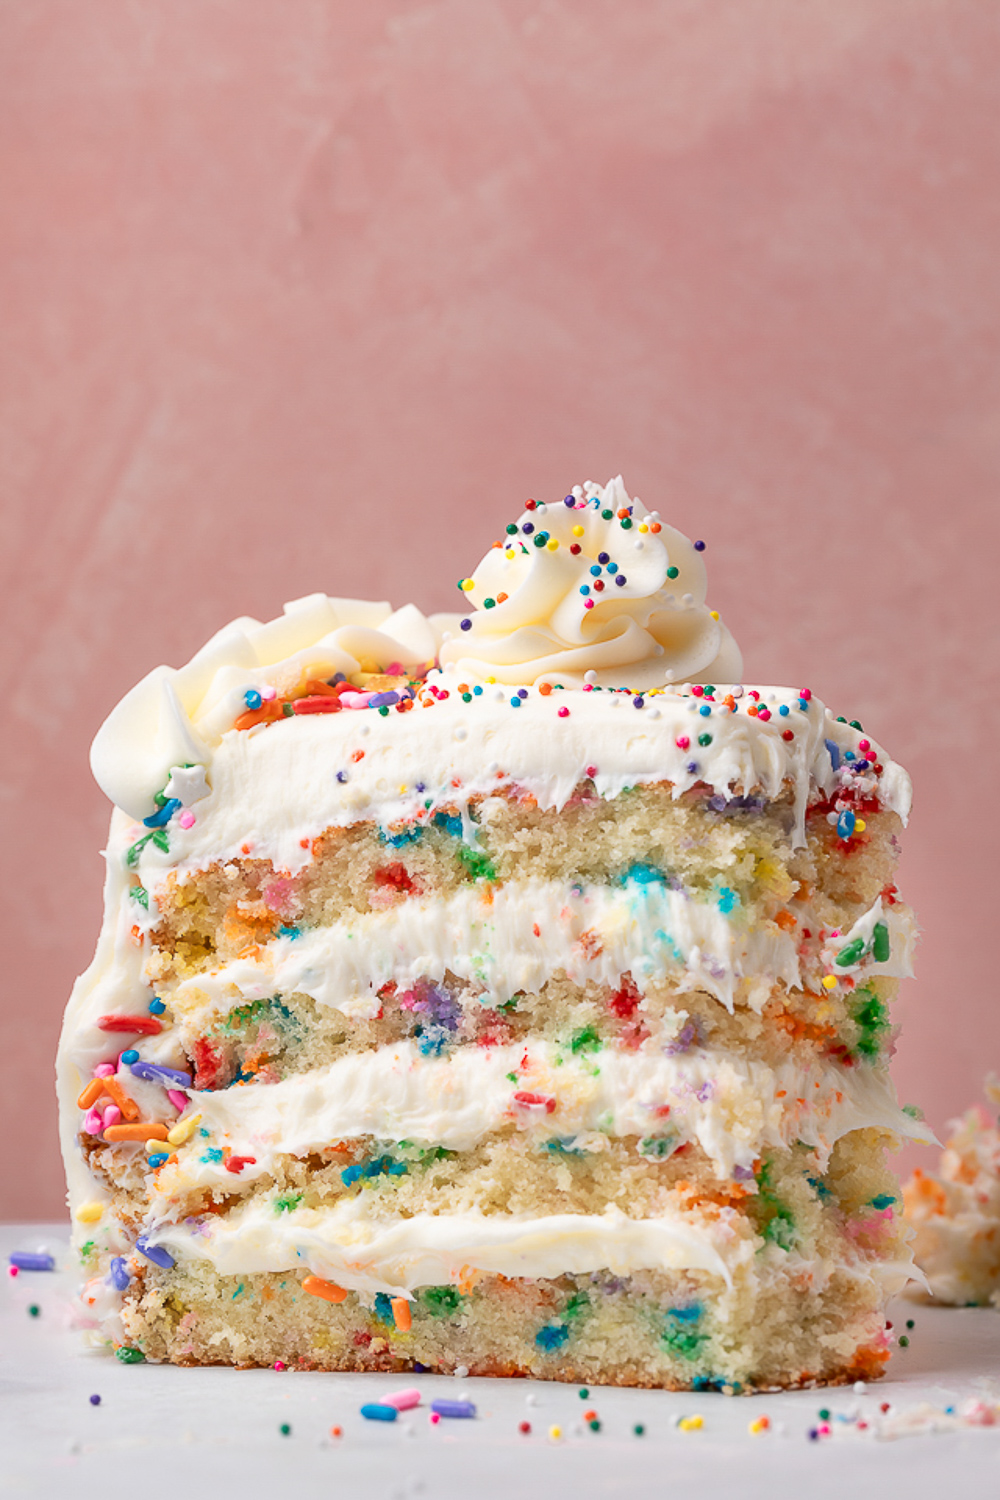 17 absolutely stunning birthday cake recipes that are perfect for almost any occasion!